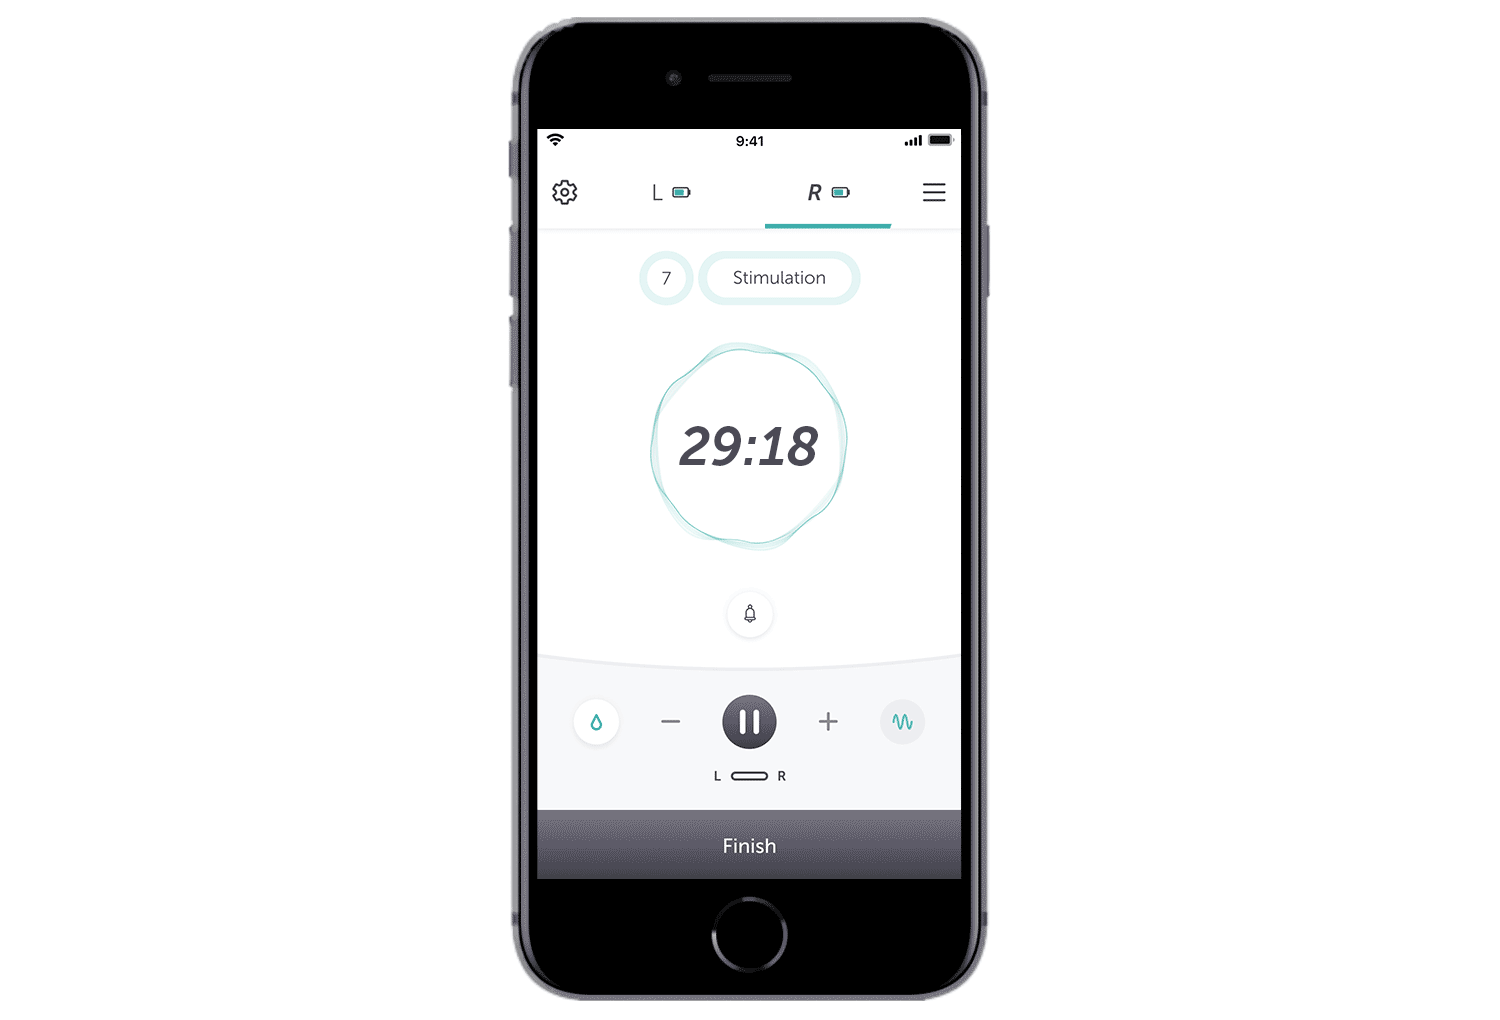 Animated image showing the Pump with Elvie app timing a session, and automatically switching between modes